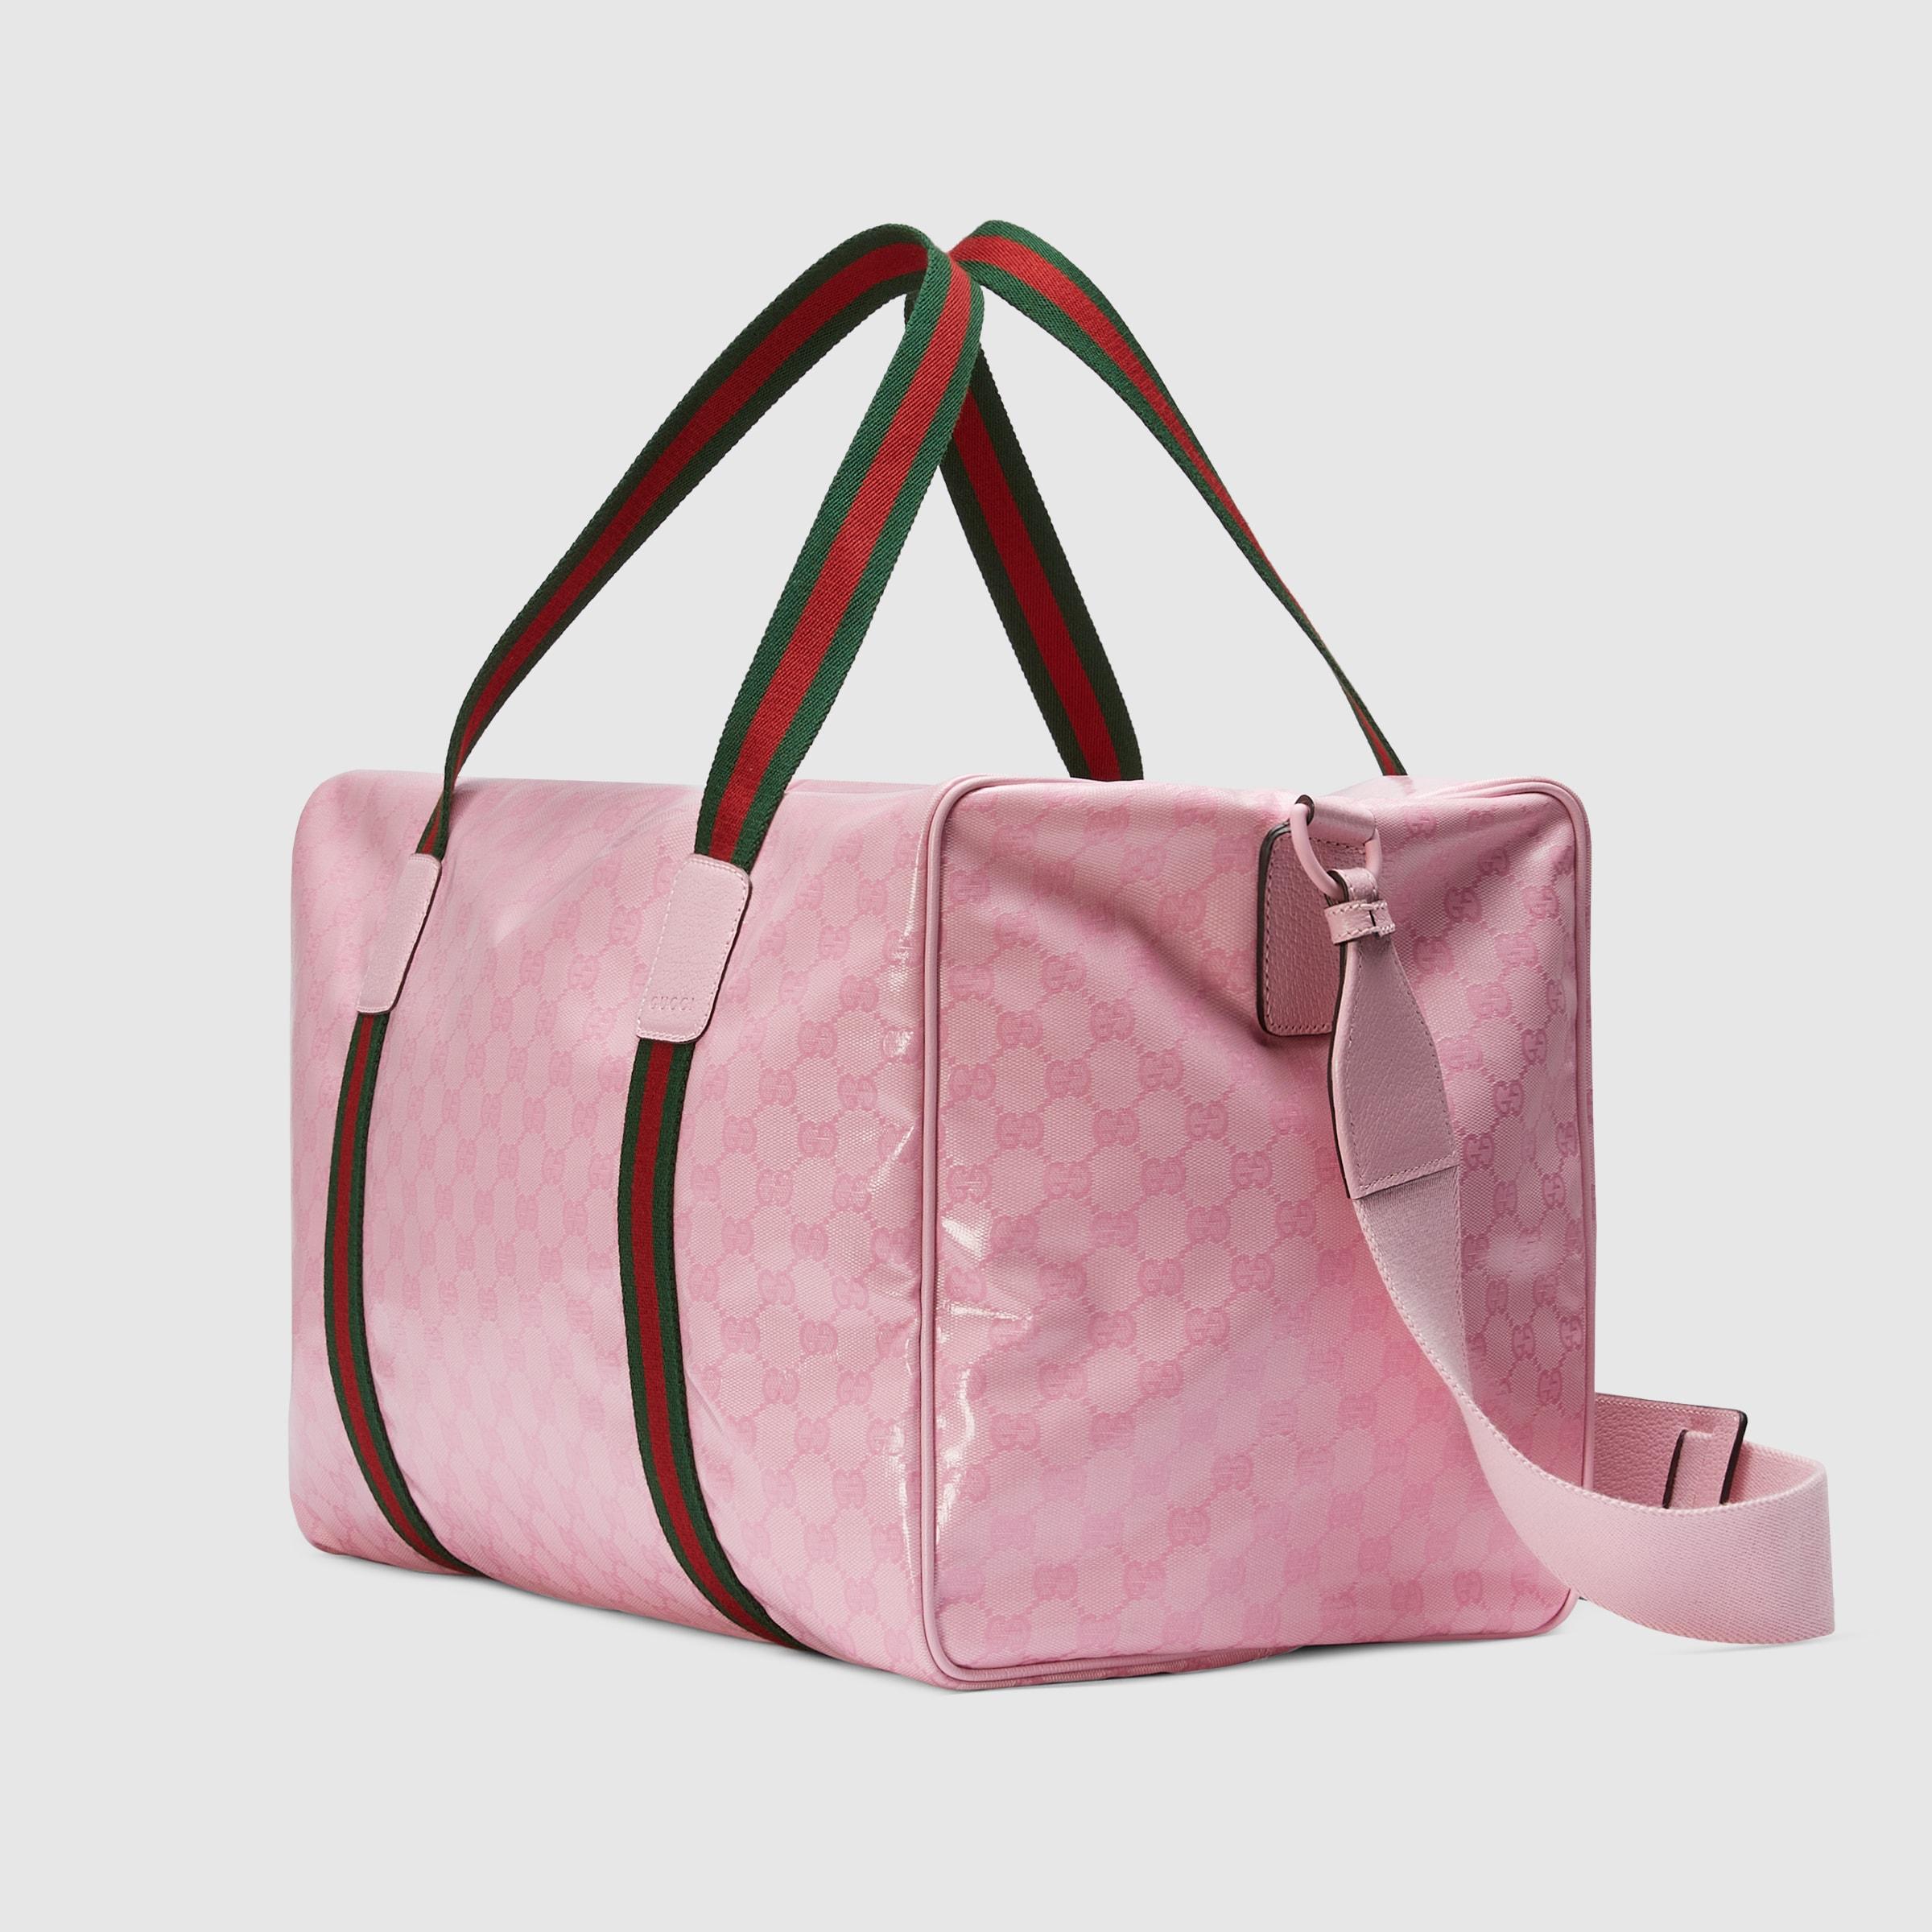 Gucci Medium Pink Coated Canvas GG Web Tote